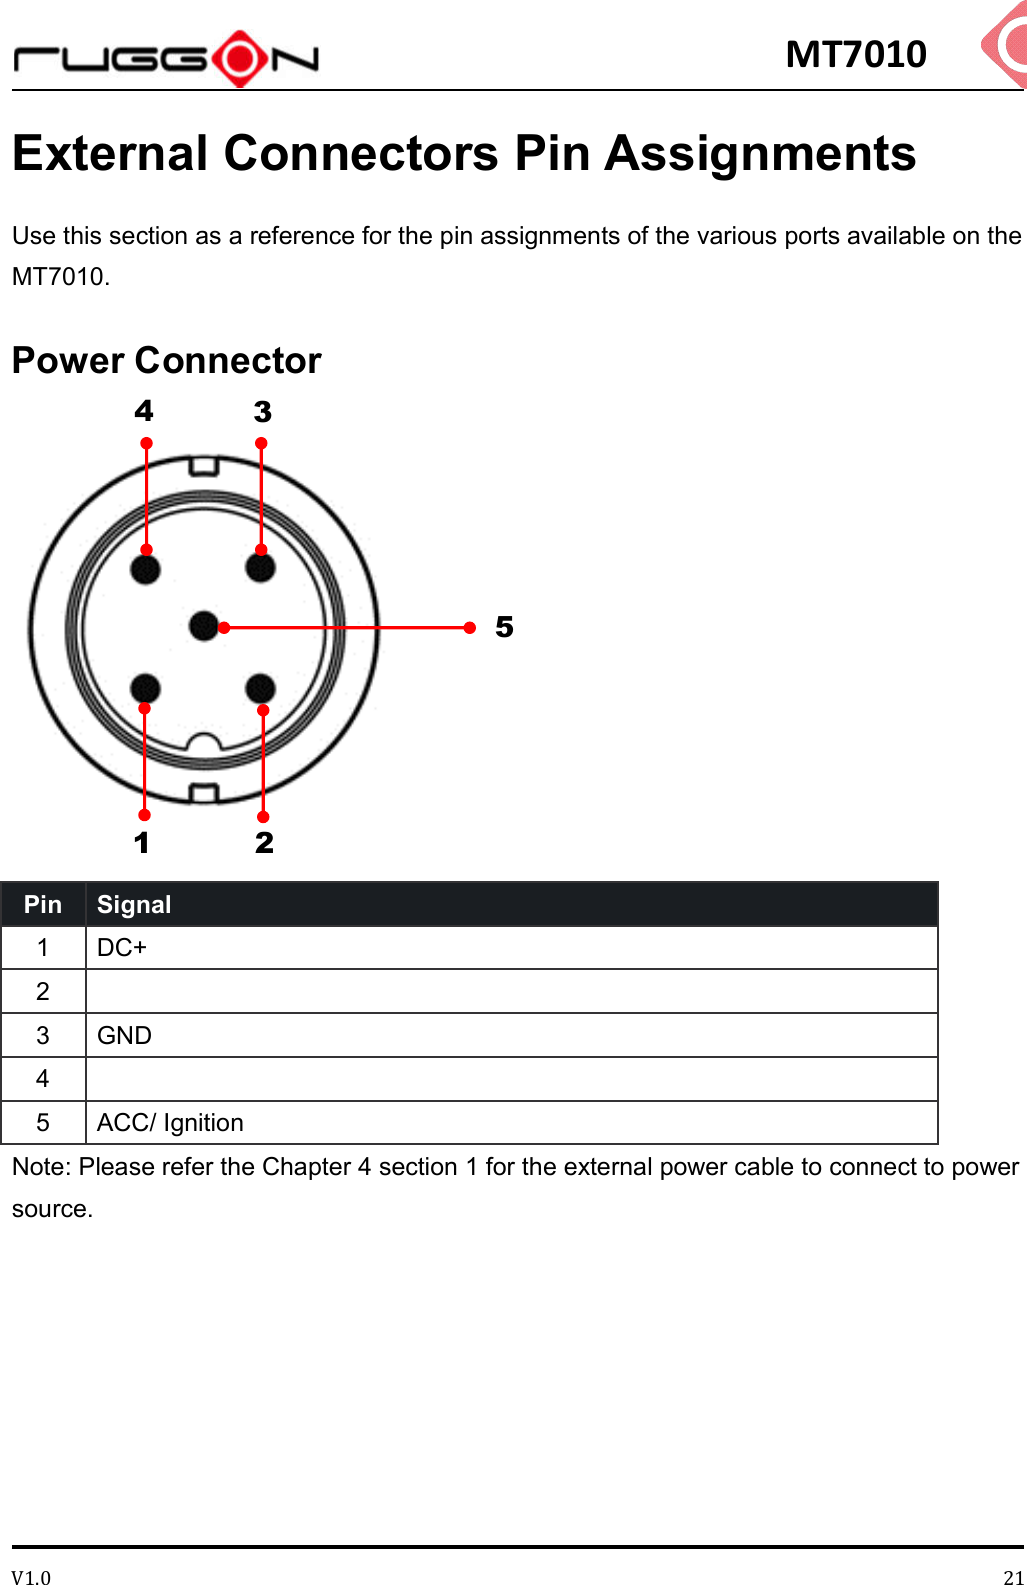 MT7010 V1.0 21External Connectors Pin Assignments Use this section as a reference for the pin assignments of the various ports available on the MT7010. Power Connector   Pin Signal   1  DC+ 2   3  GND   4   5  ACC/ Ignition Note: Please refer the Chapter 4 section 1 for the external power cable to connect to power source.    1 2 3 4 5 